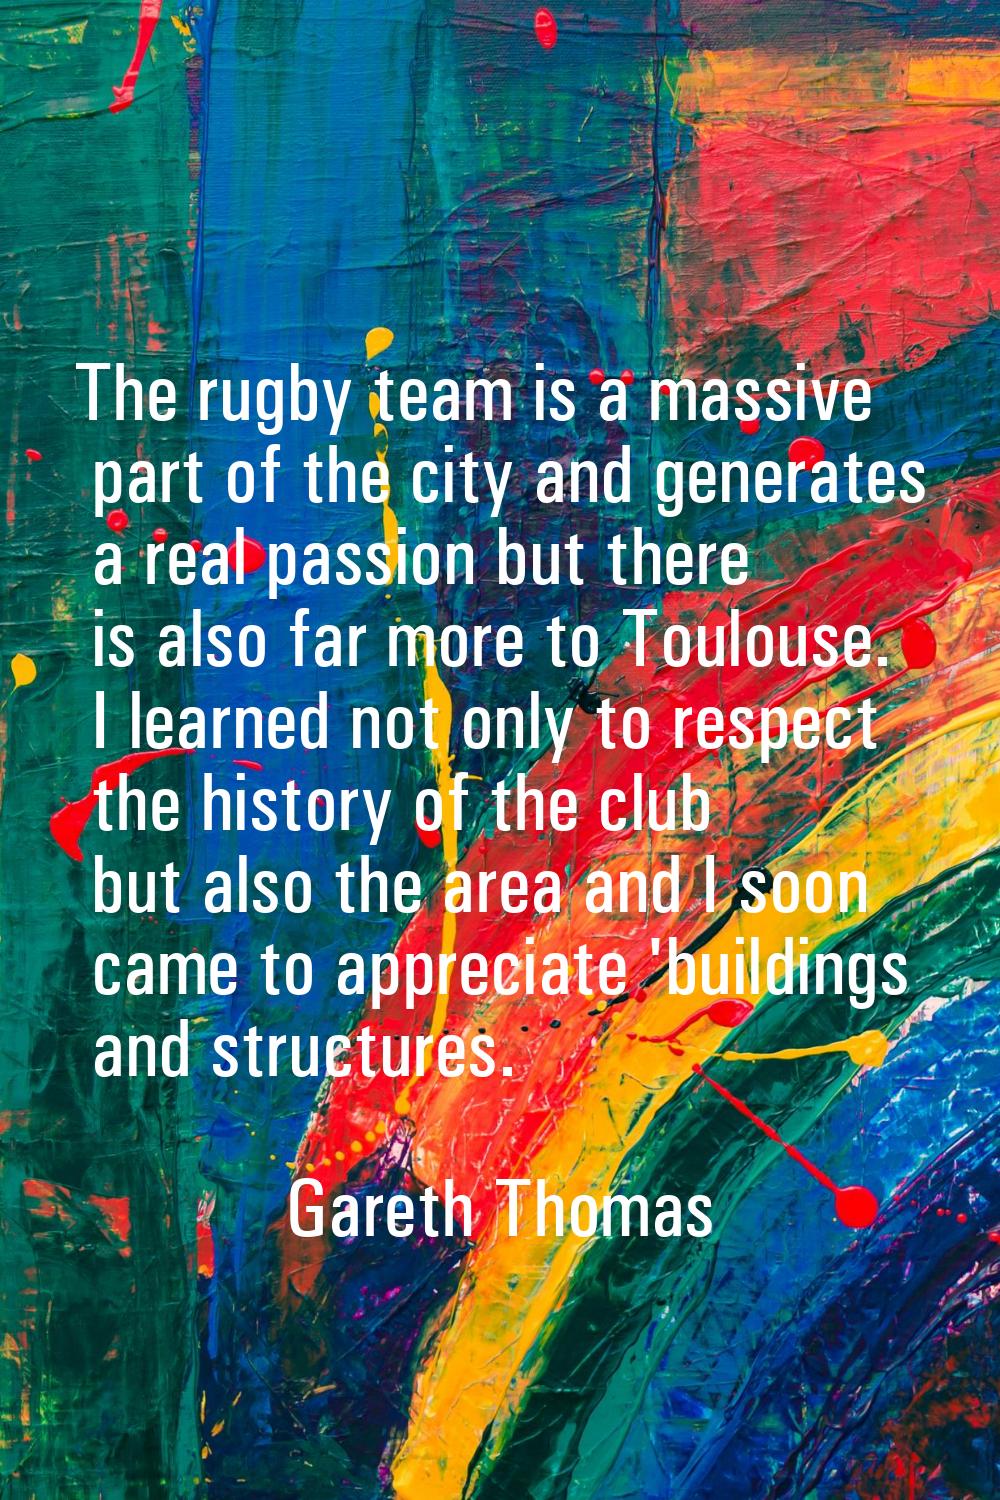 The rugby team is a massive part of the city and generates a real passion but there is also far mor